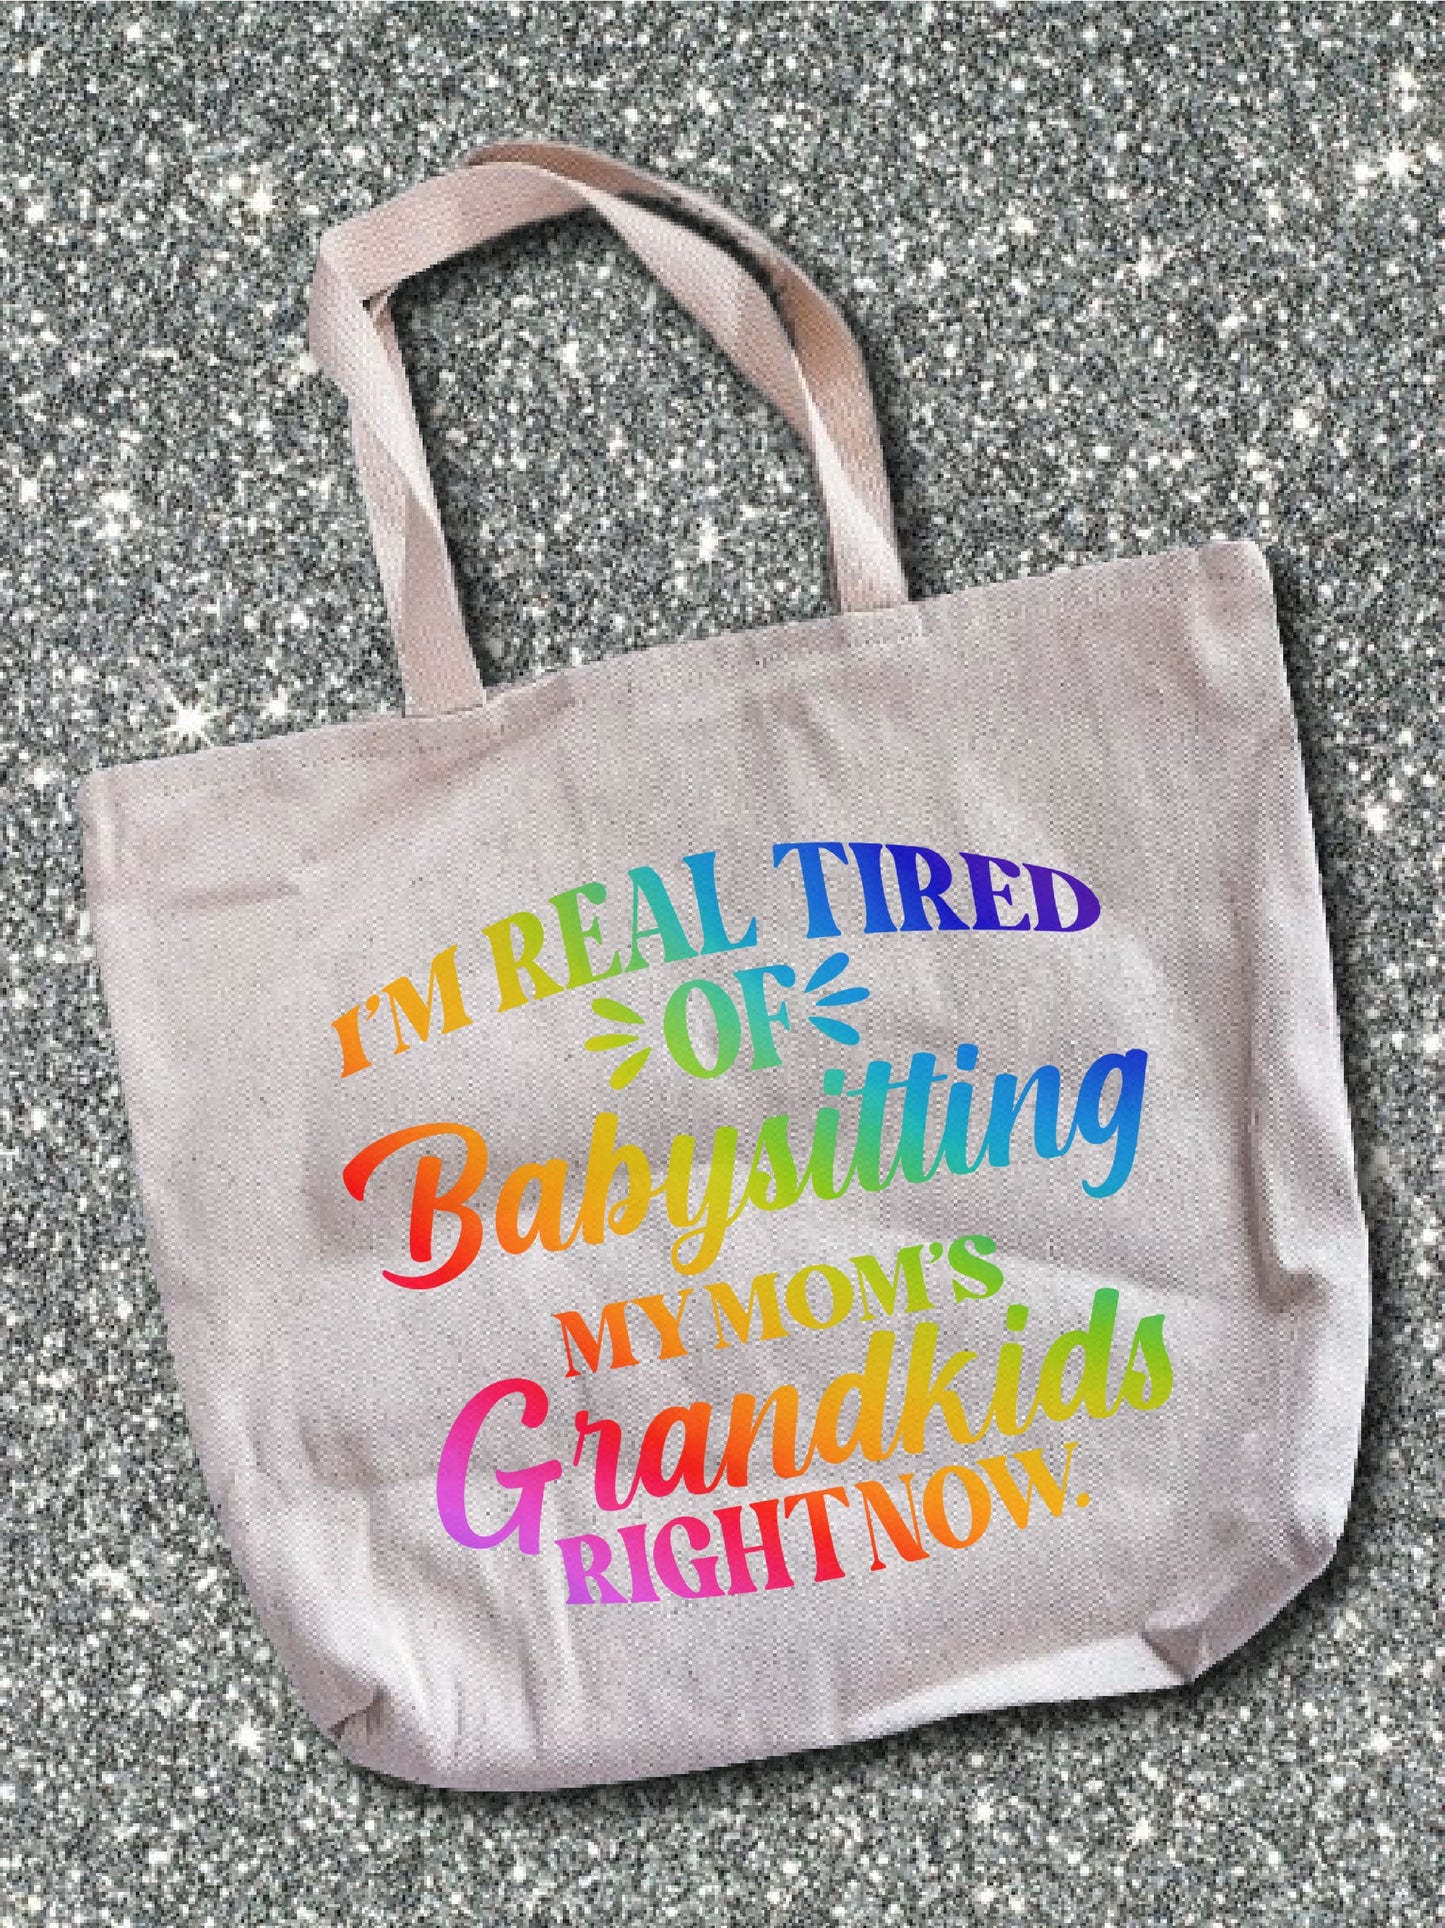 I'm Real Tired Of Babysitting My Mom's Grandkids Right Now Tote Bag